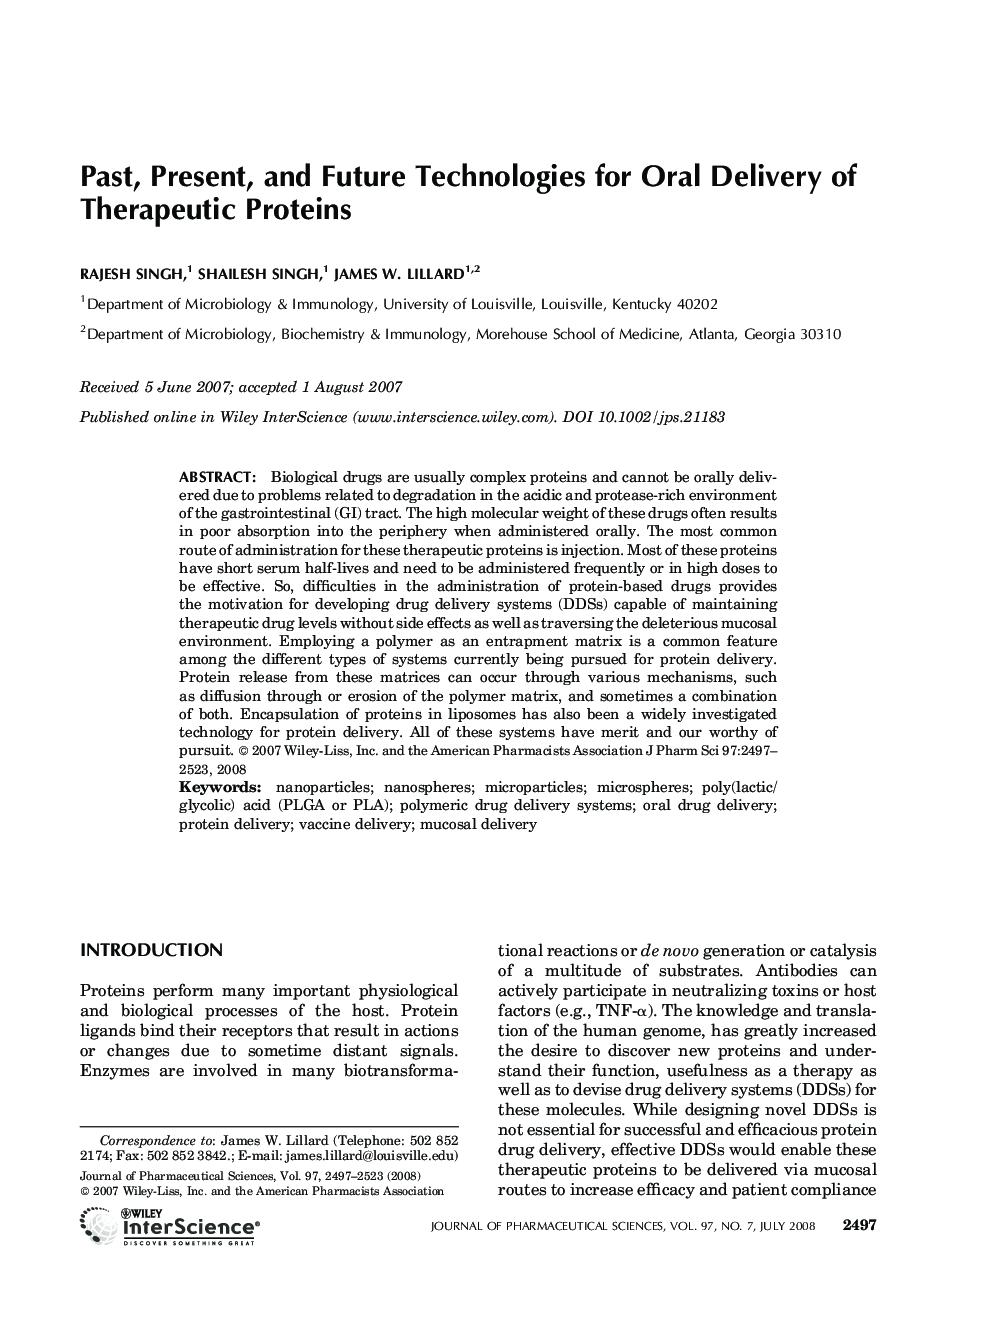 Past, Present, and Future Technologies for Oral Delivery of Therapeutic Proteins